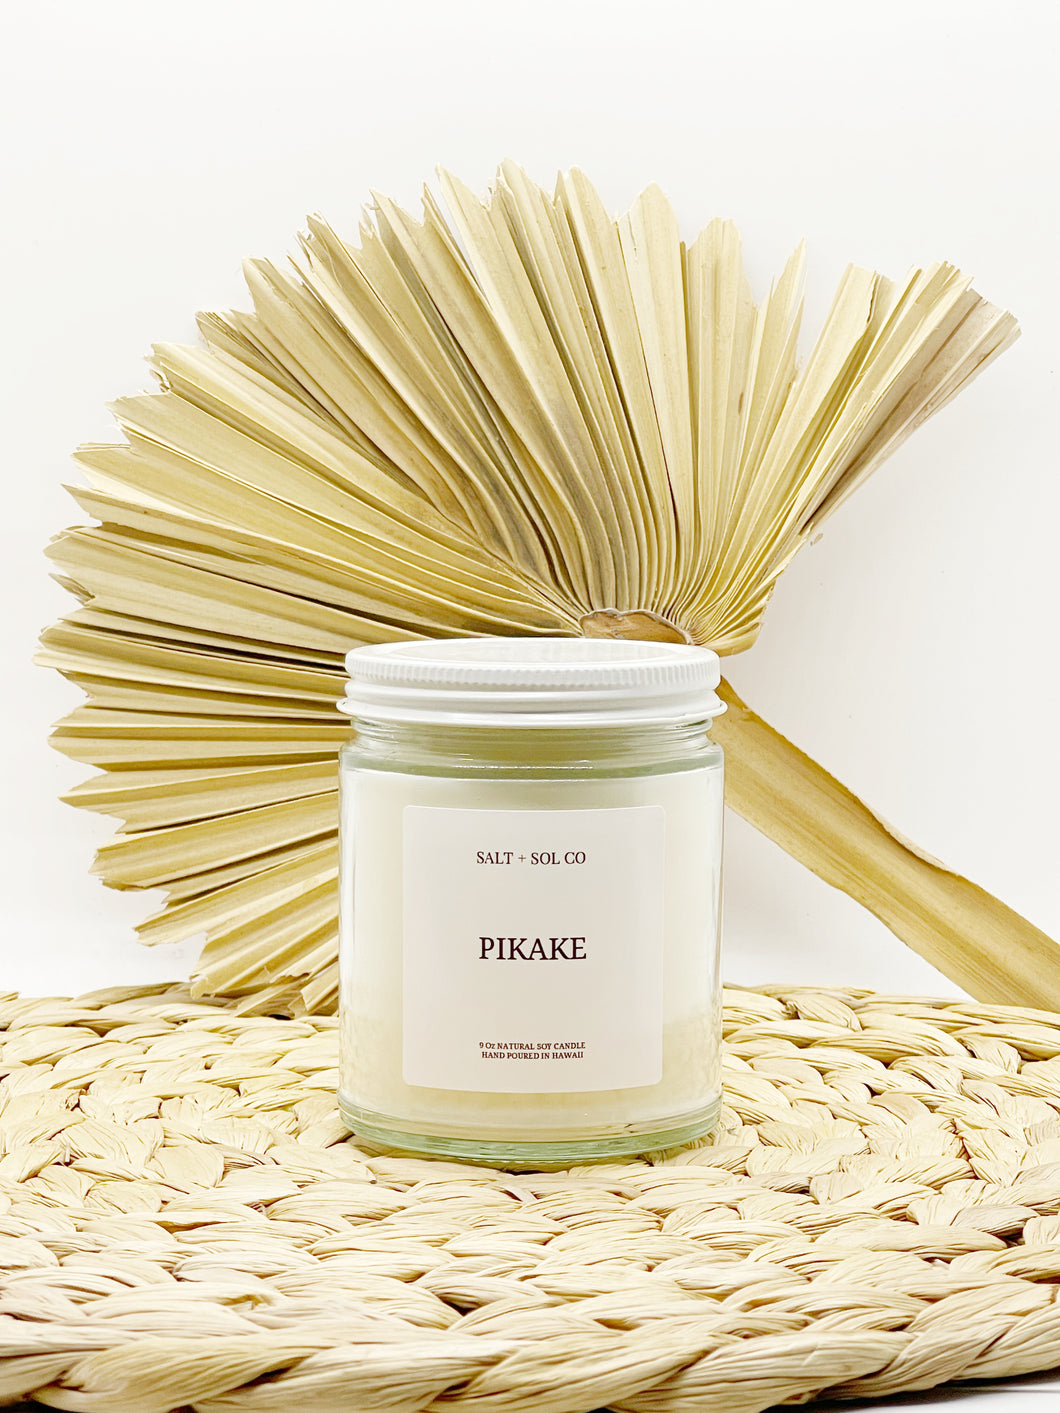 Shop Hawaiian Jasmine pikake Soy wax scented candle hand poured in Hawaii at salt and SOL co 